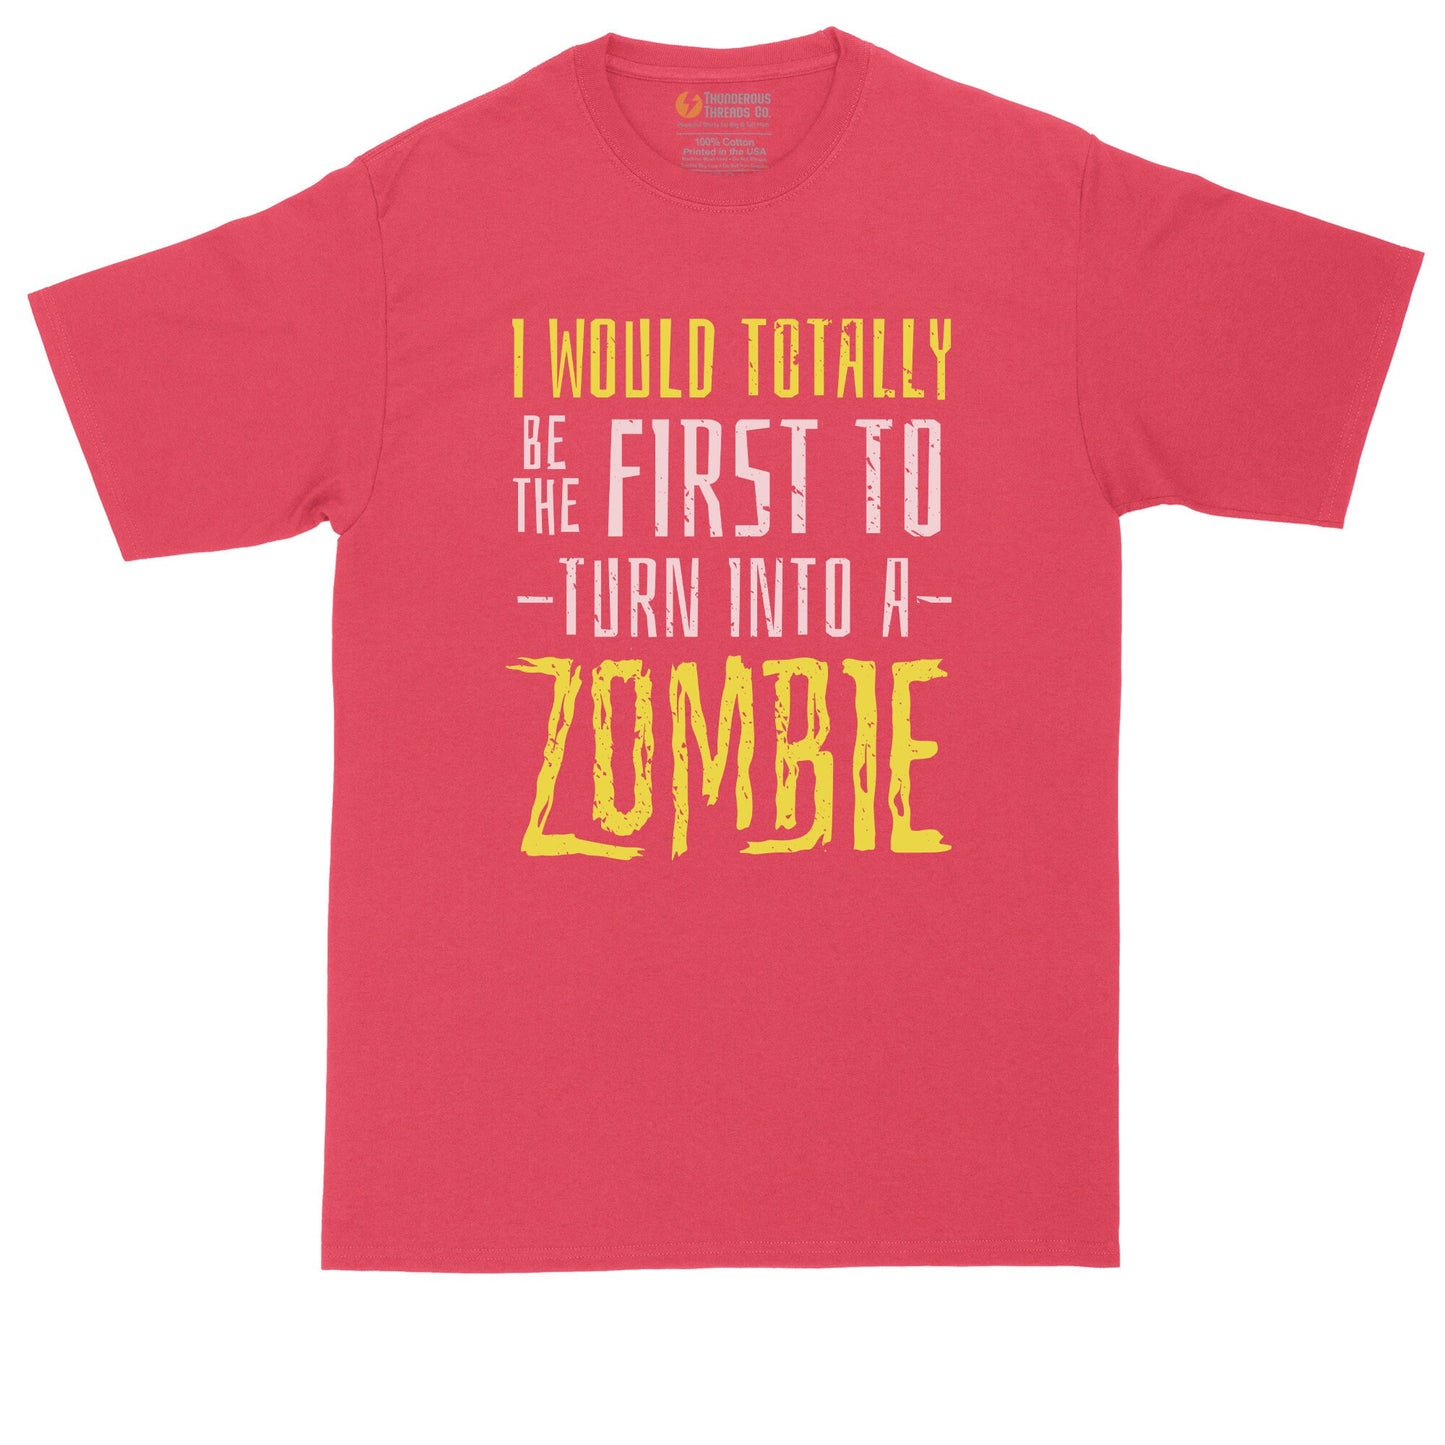 I Would Totally be the First to Turn Into a Zombie | Big and Tall Men | Funny Shirt | Zombie Shirt | Big Guy Shirt